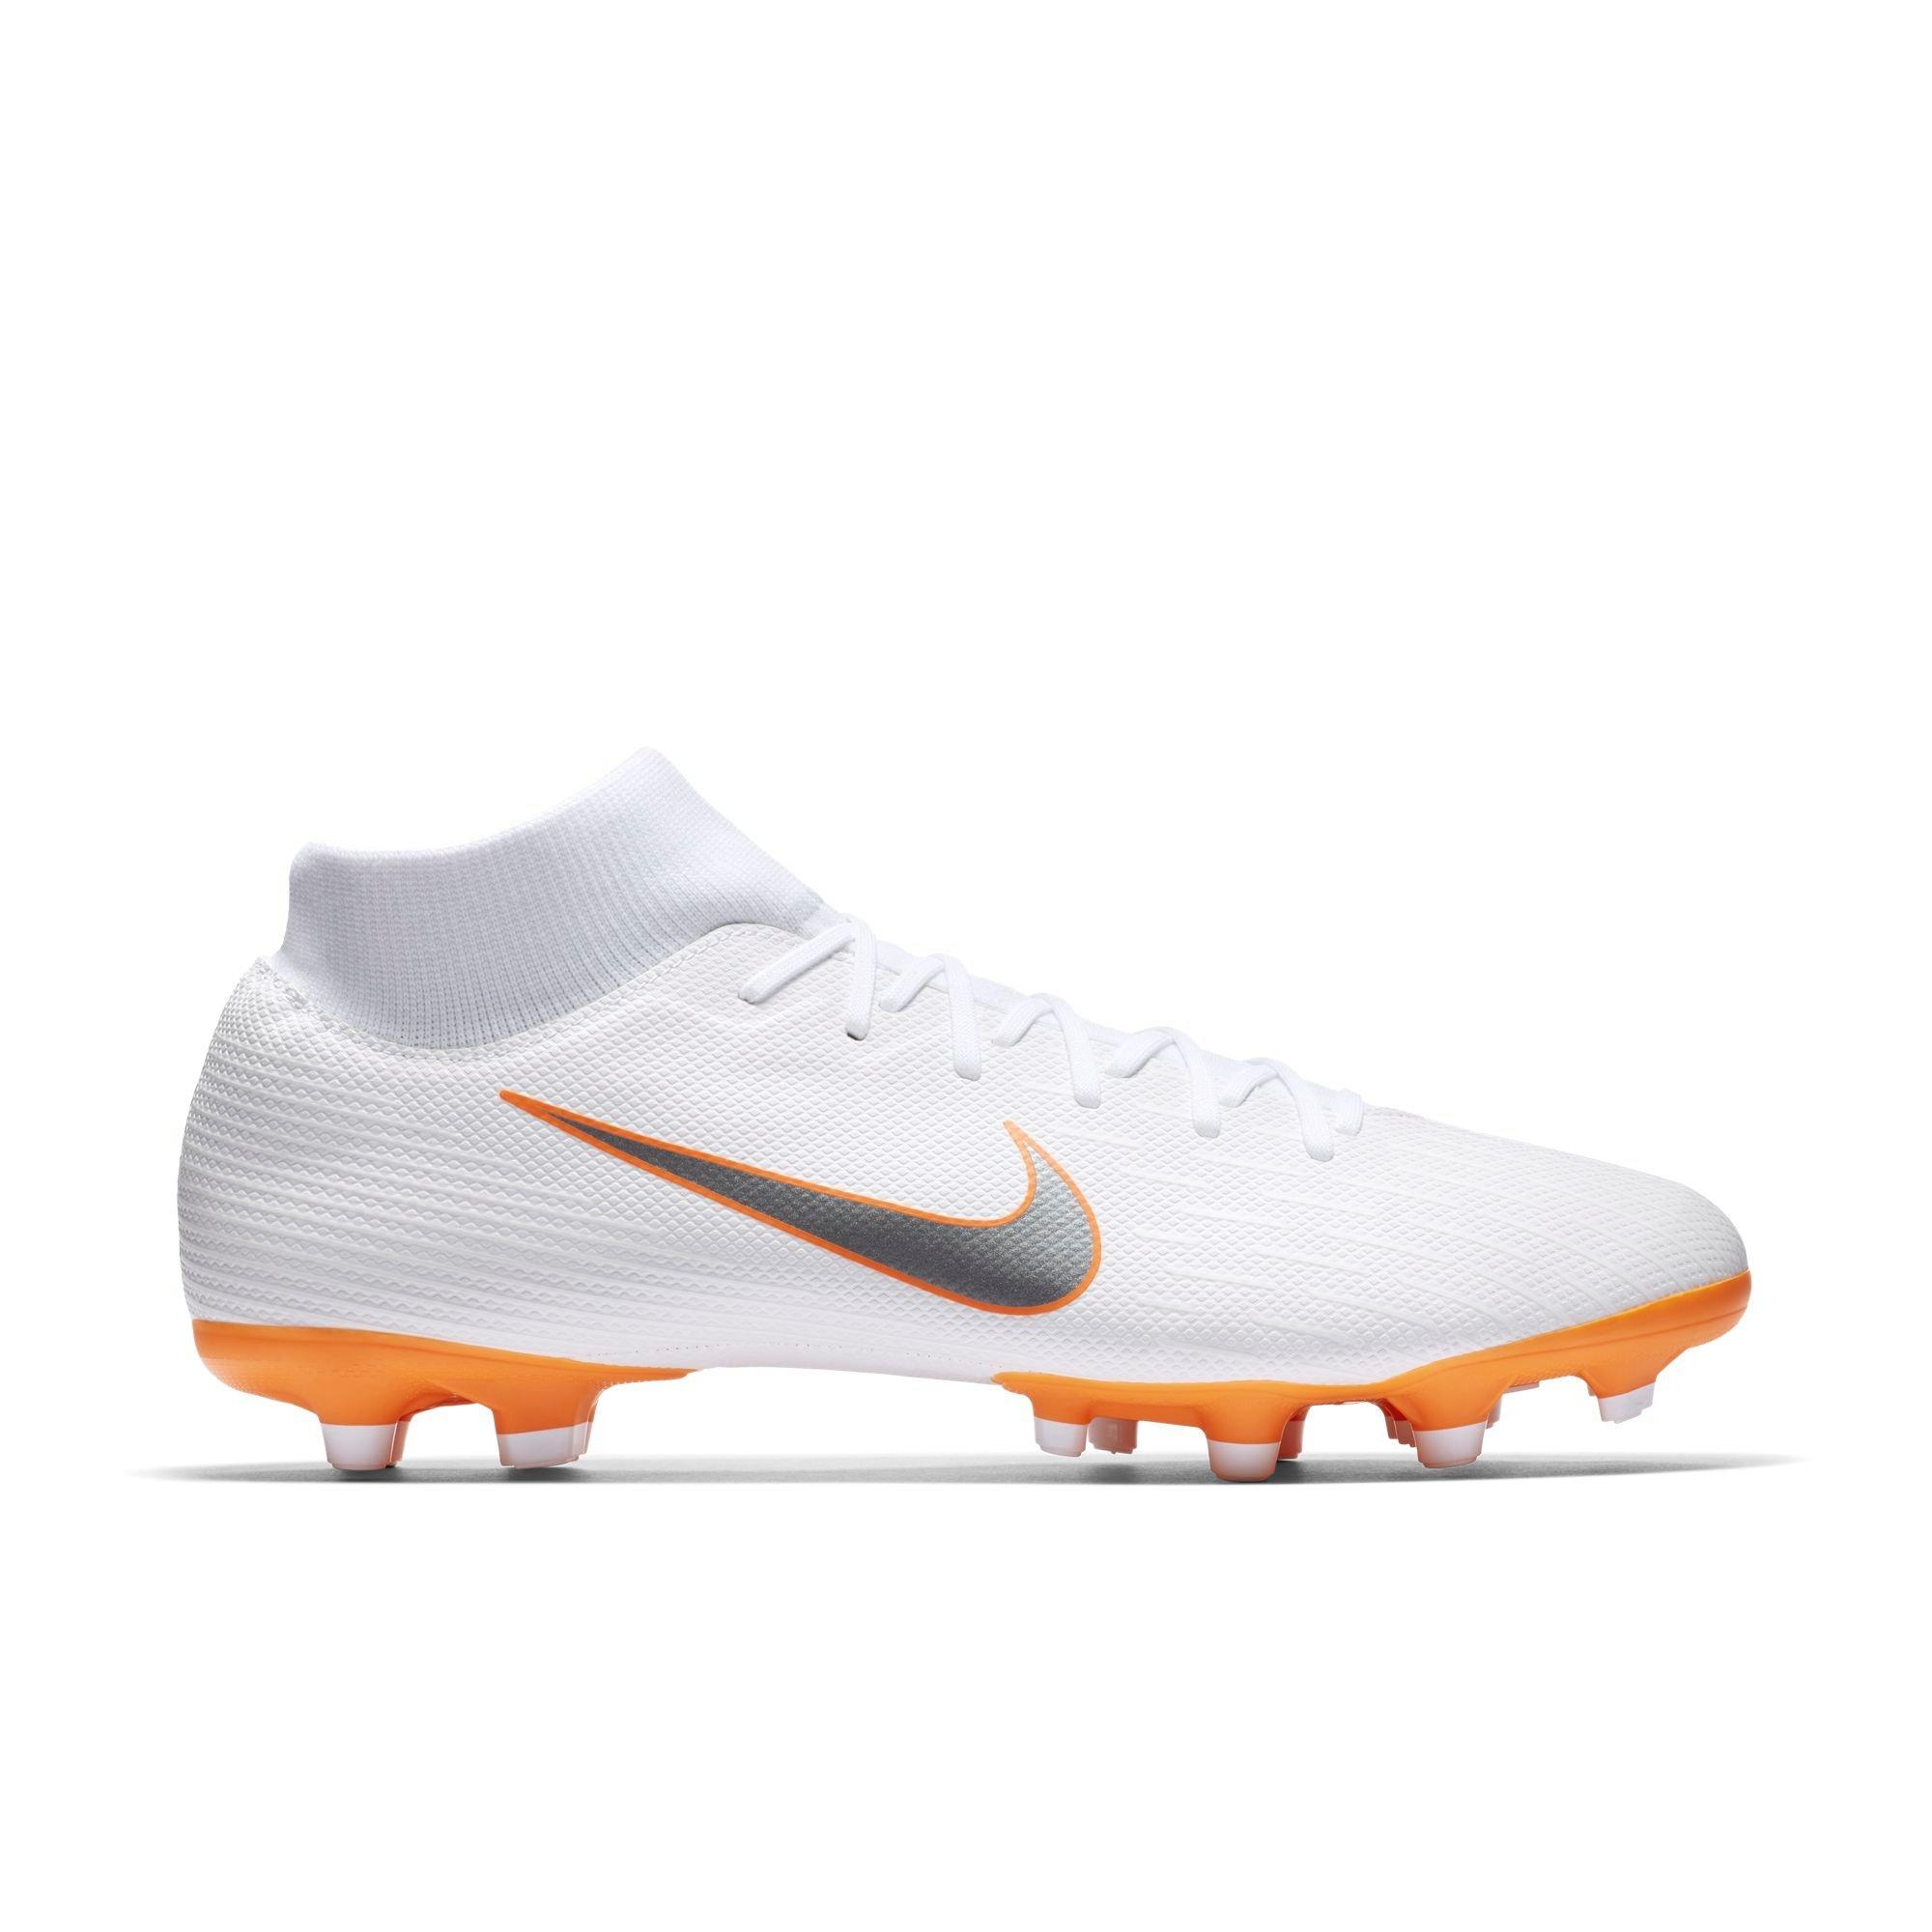 Nike Mercurial Superfly 7 Academy MDS IC. Intersport